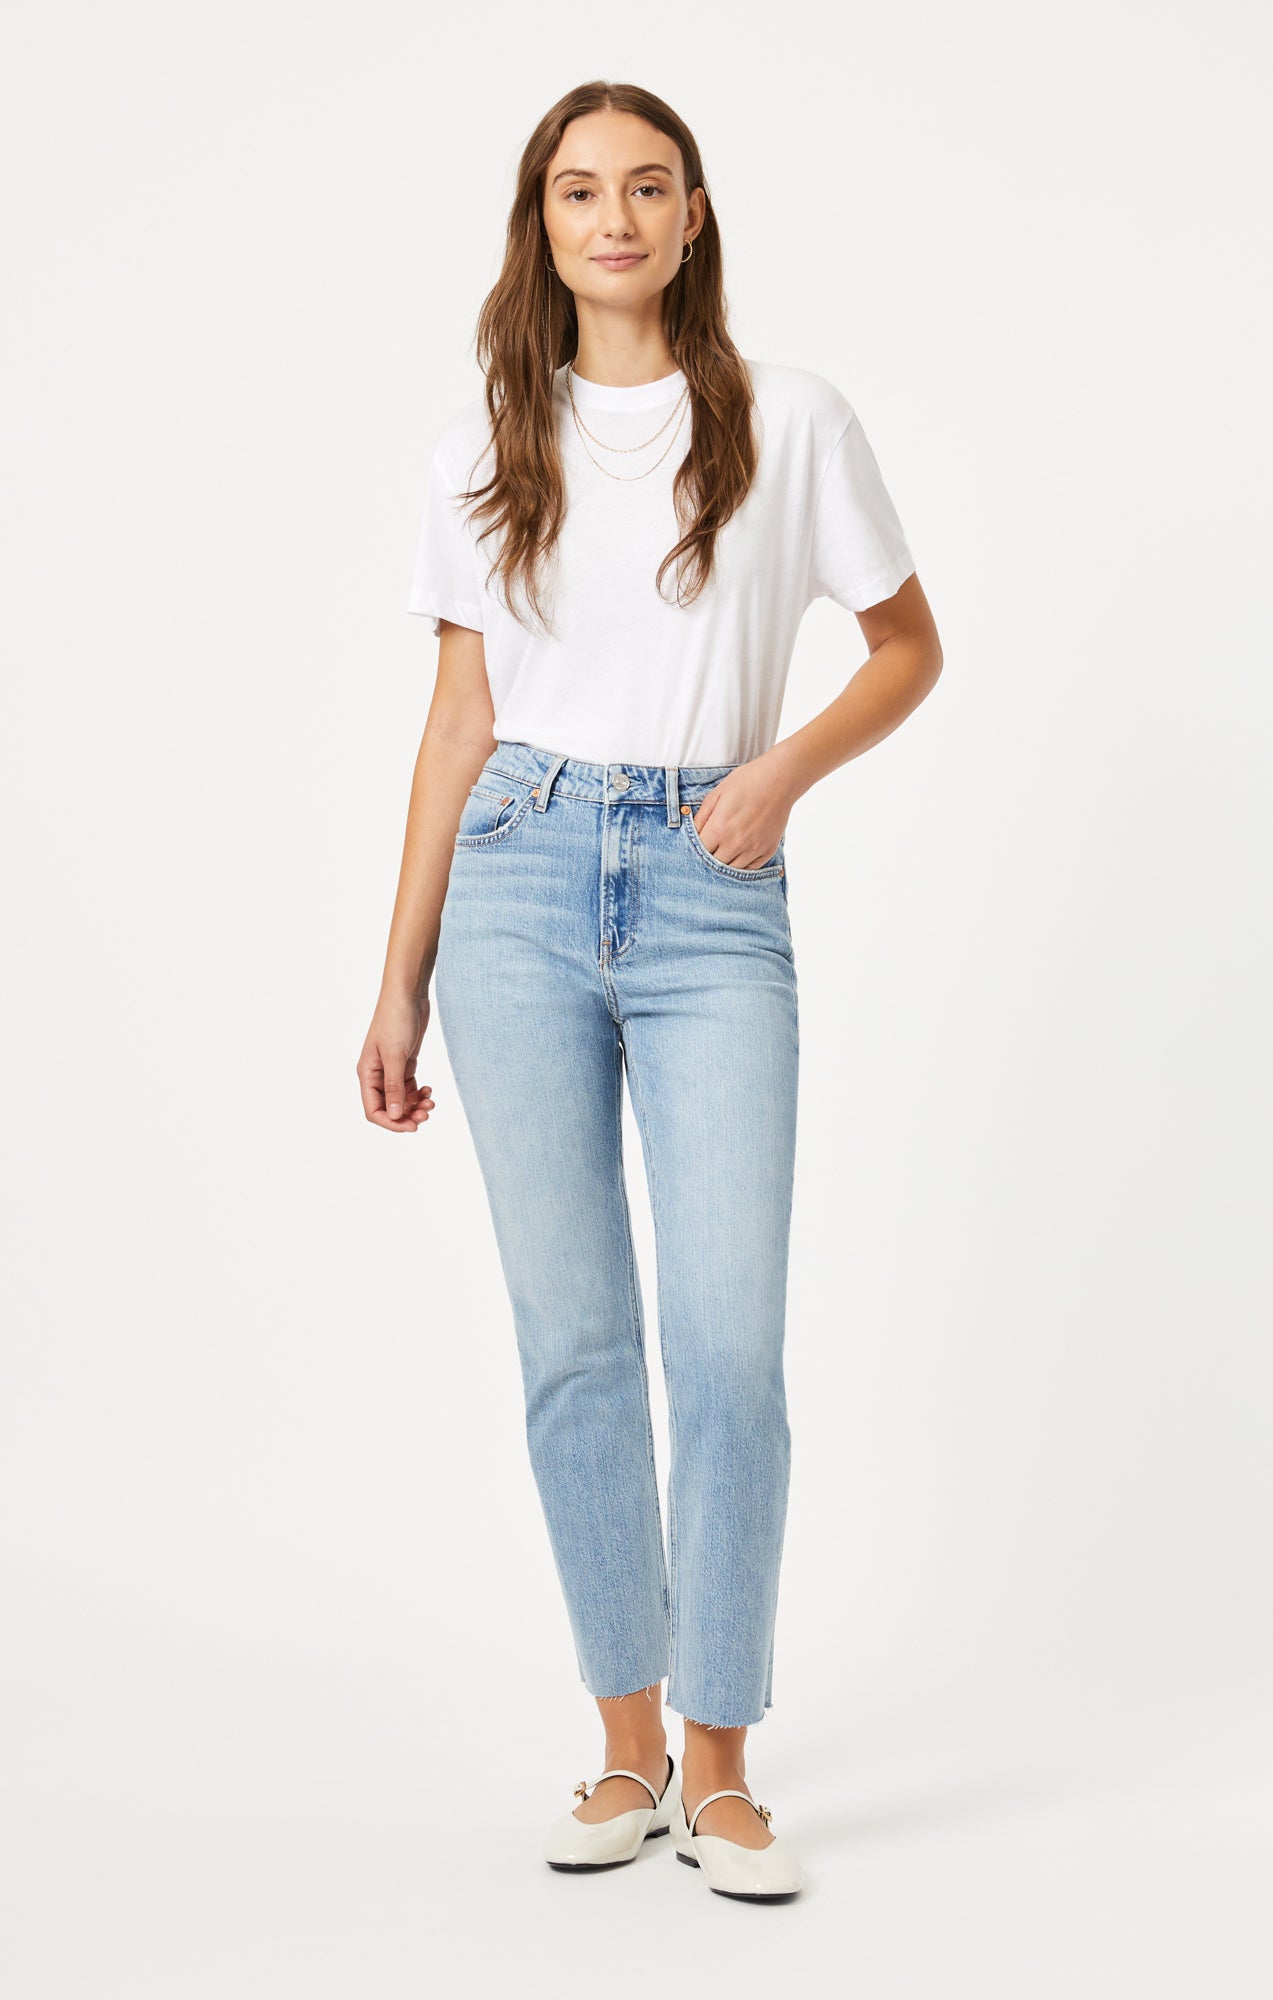 Mid Rise Jeans for Women, Womens Jeans